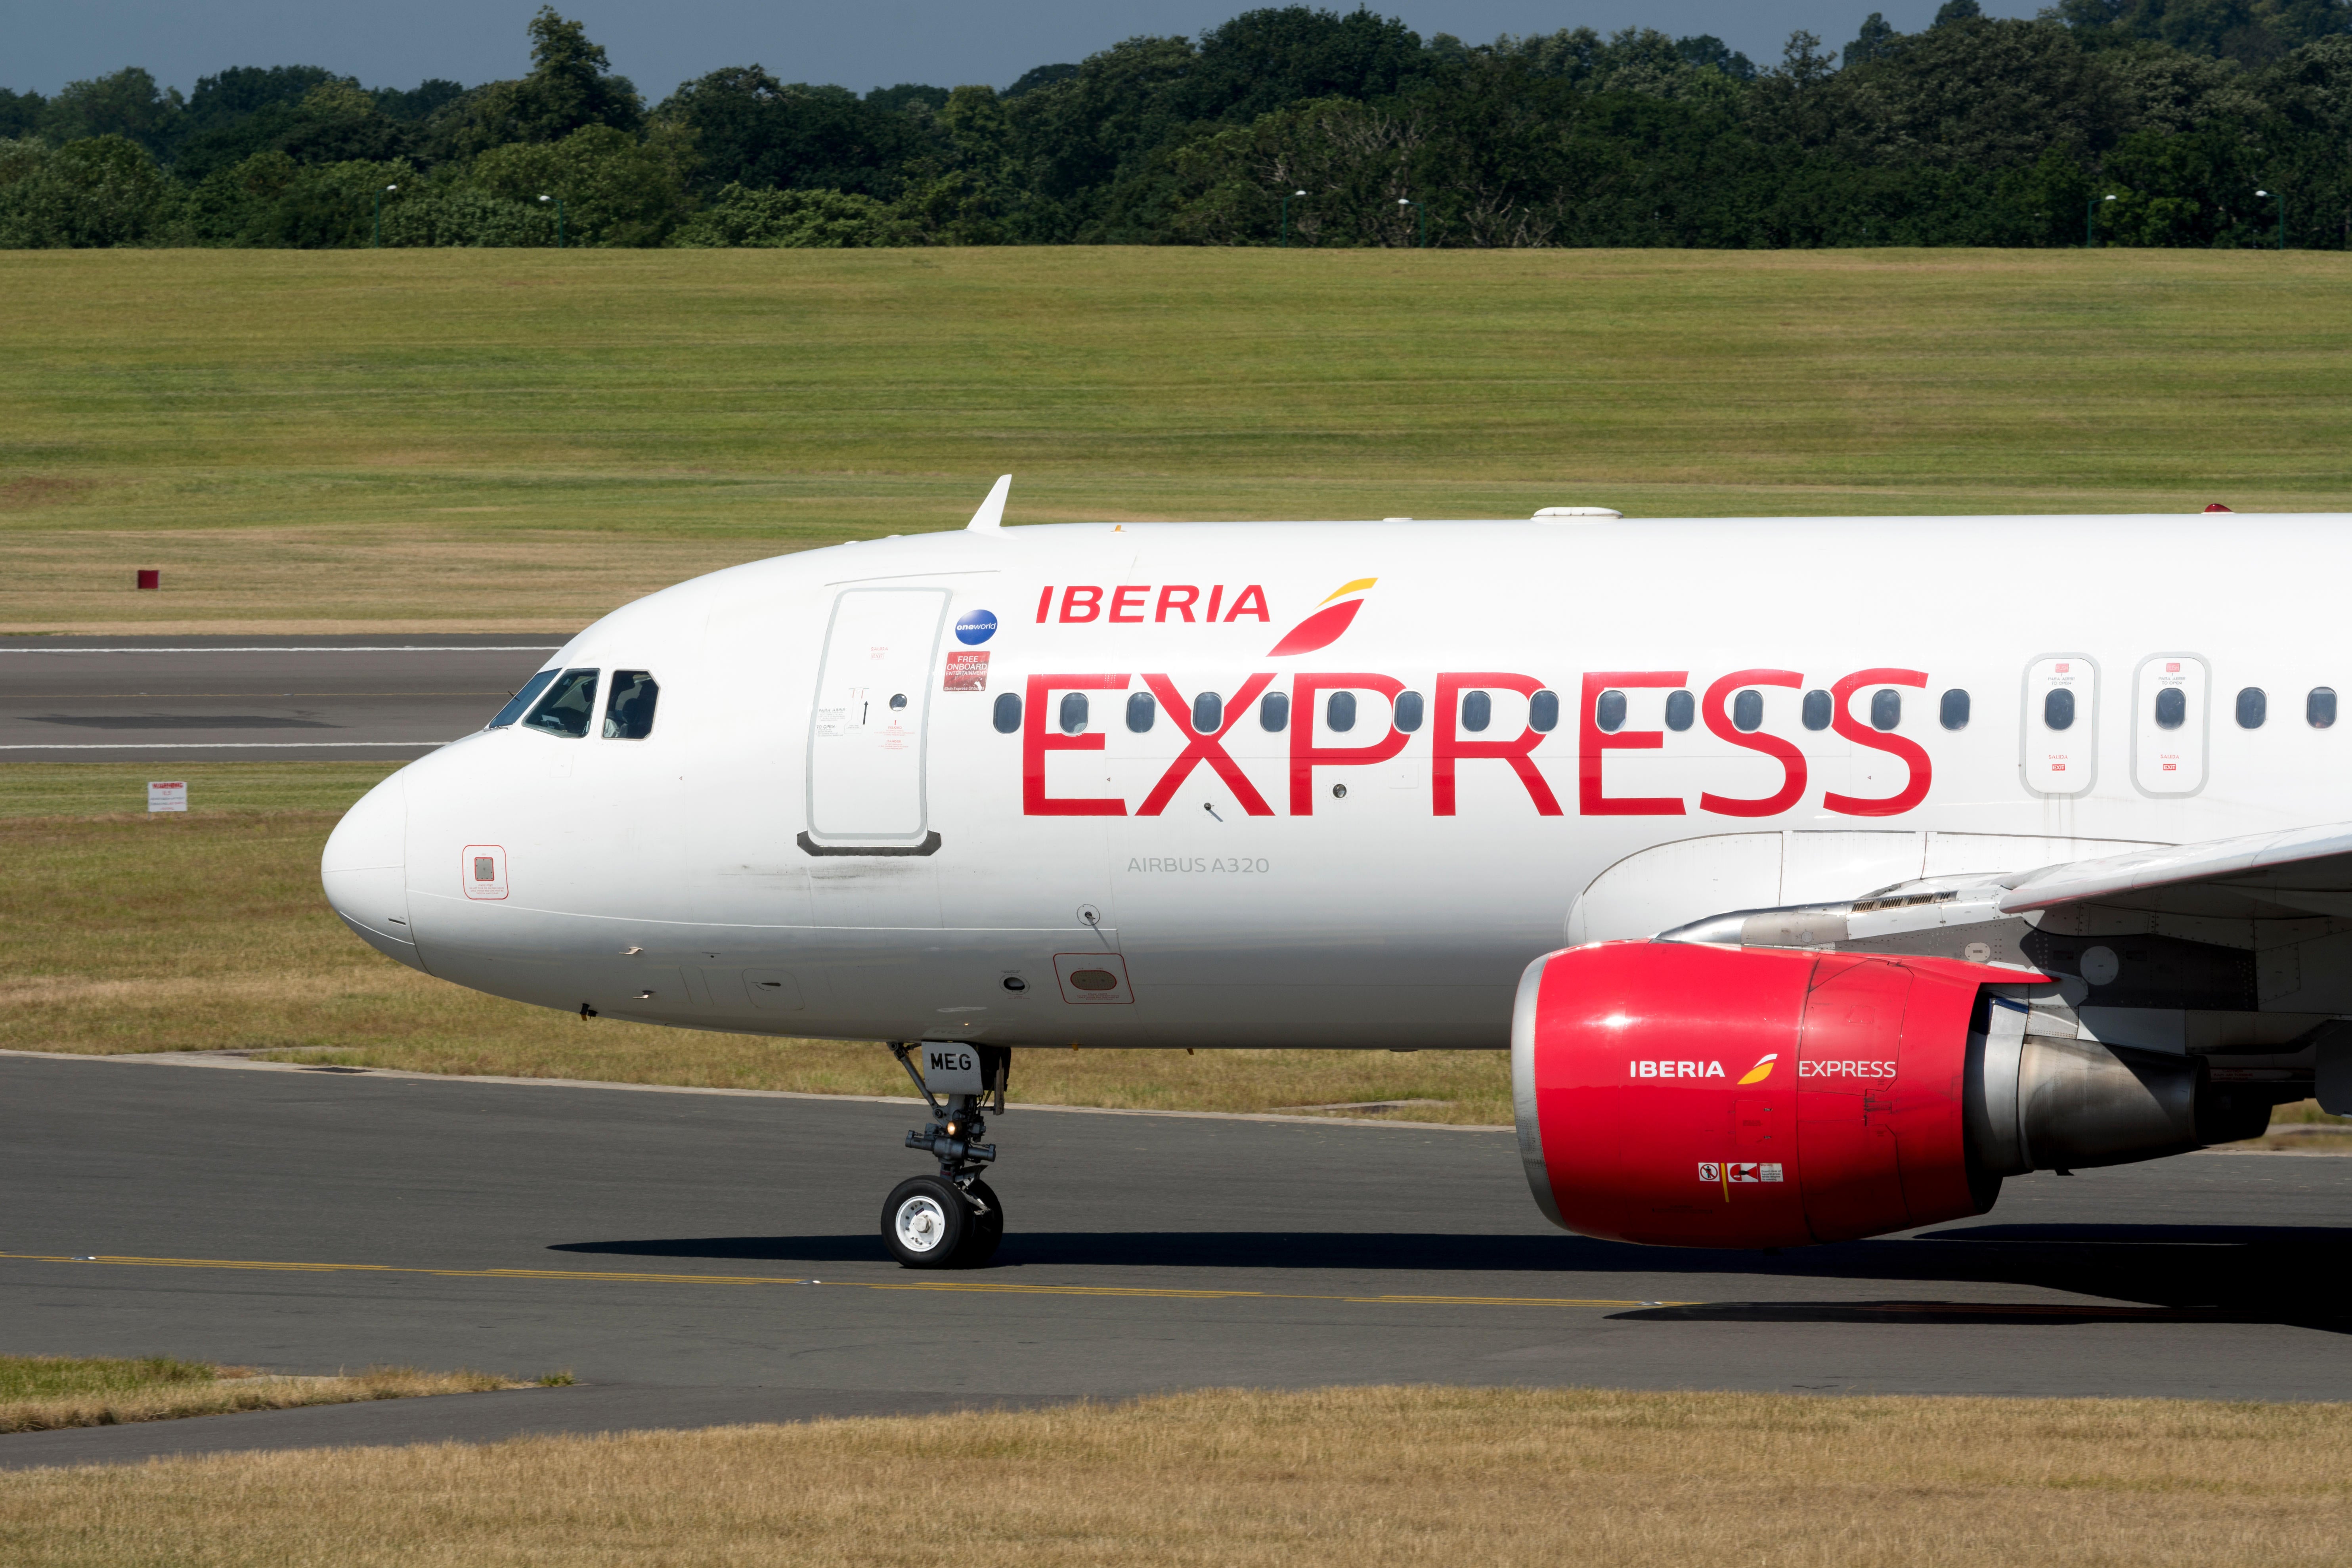 Iberia Express is a Spanish low-cost airline owned by Iberia